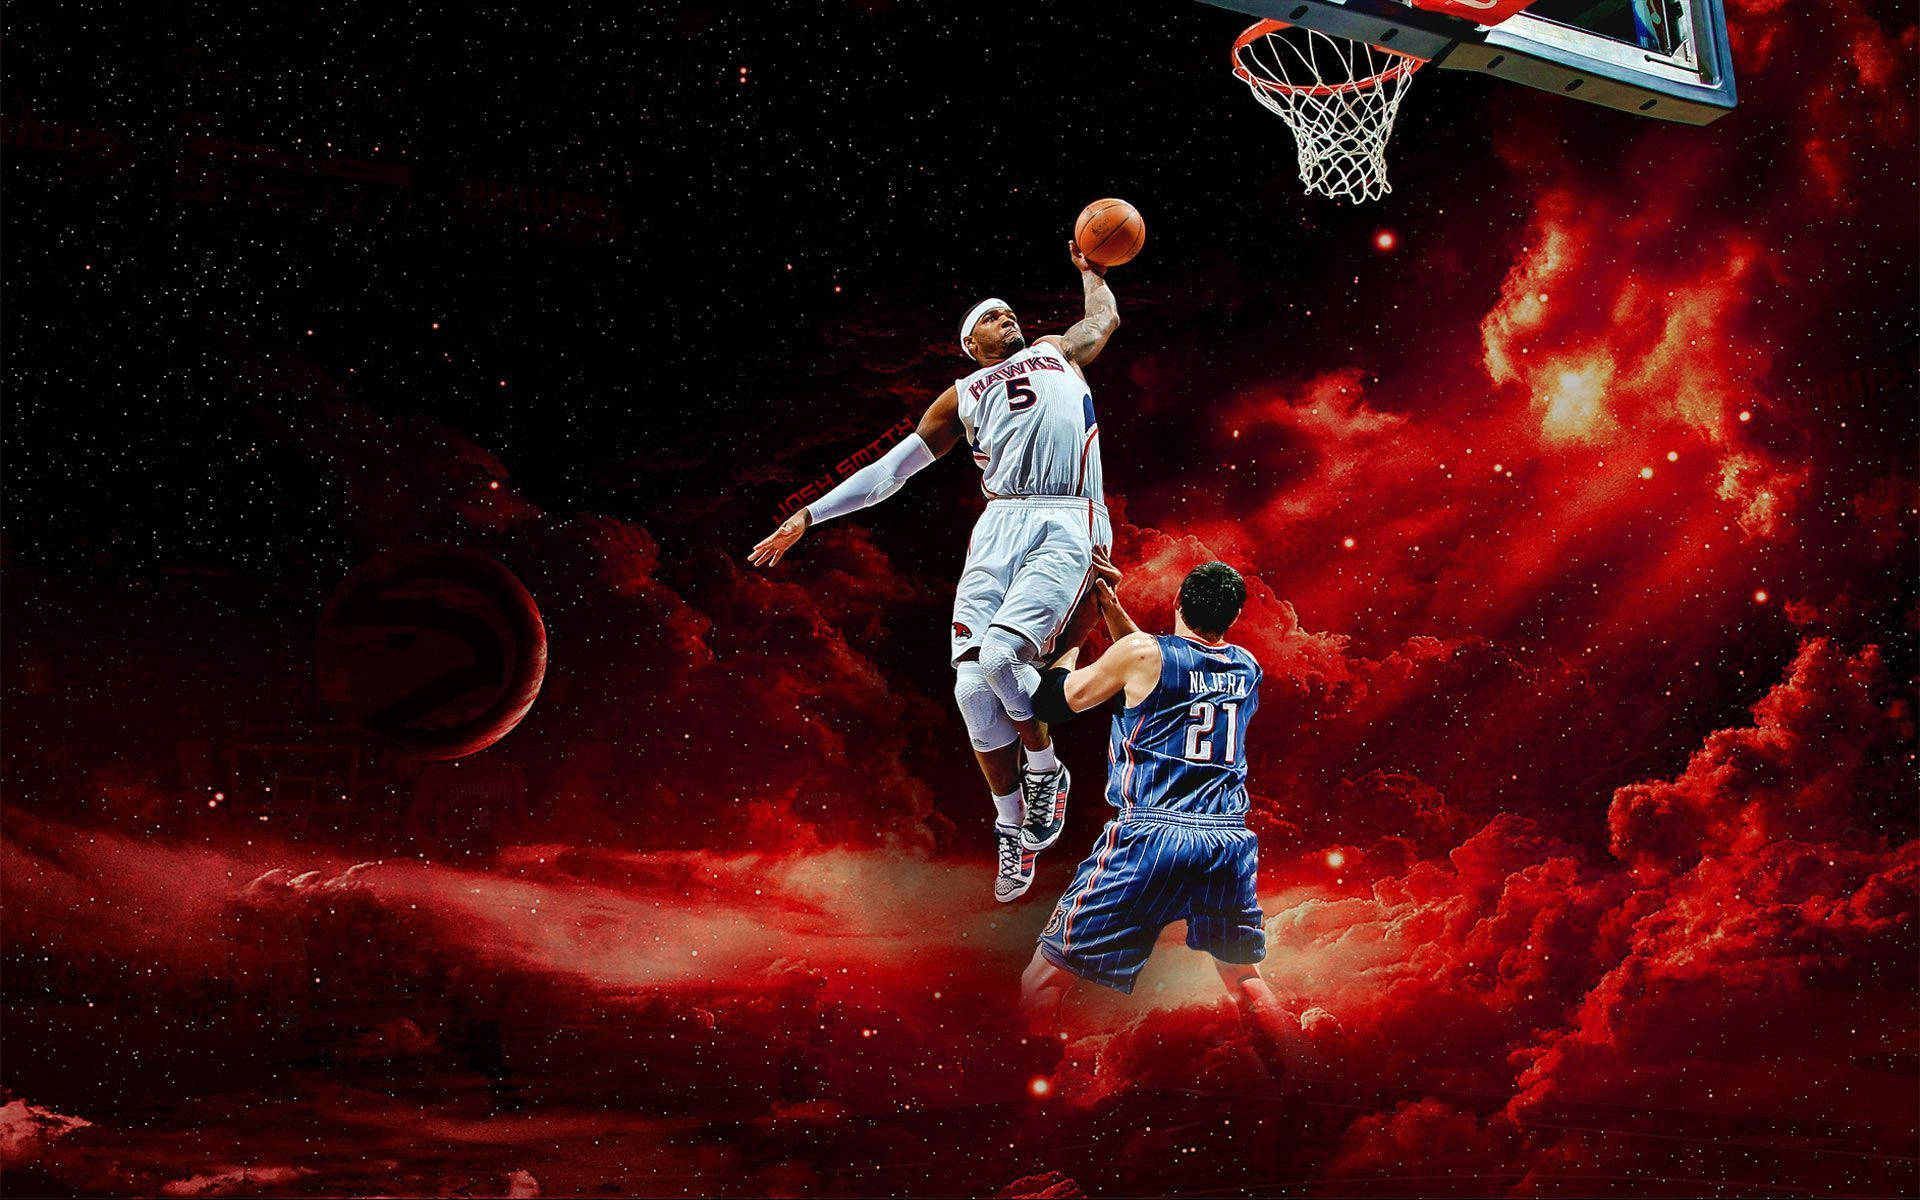 Cool Nba Space Poster